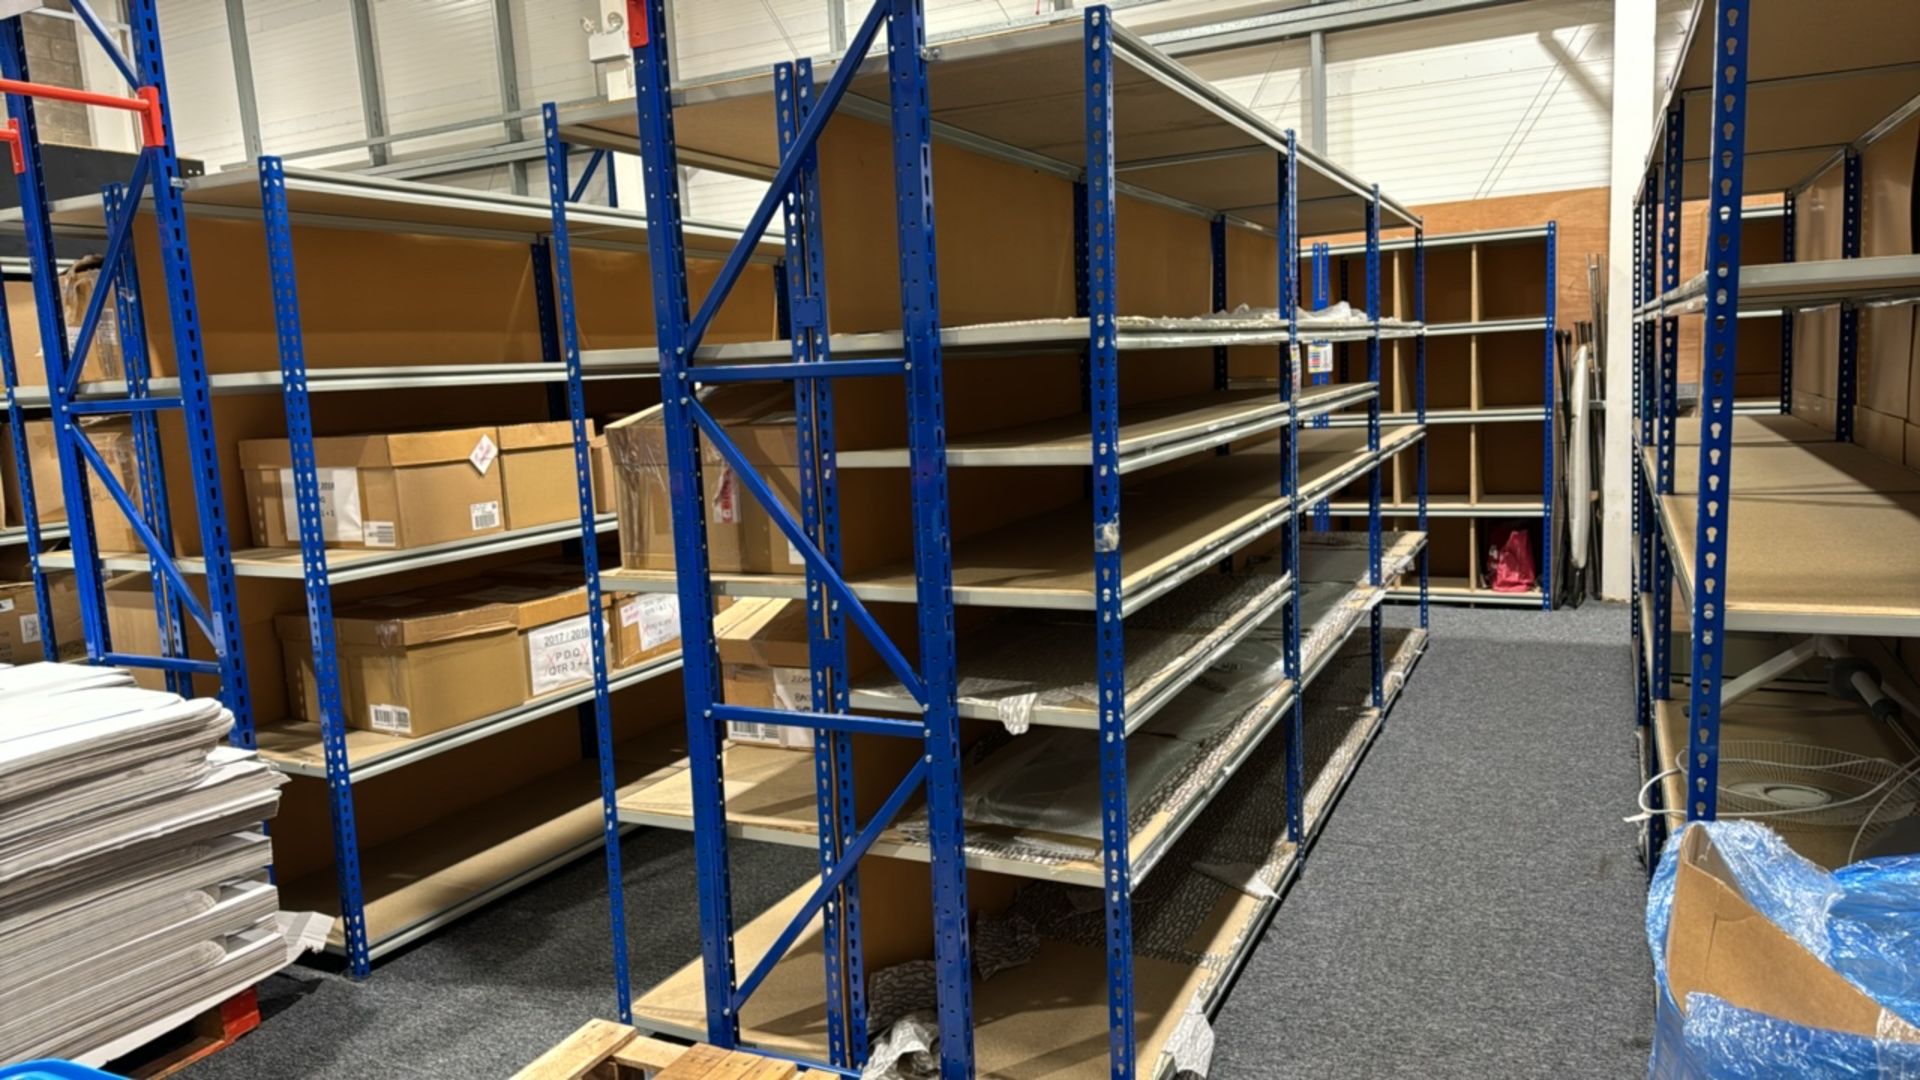 6 bays Of Back To Back Boltless Racking